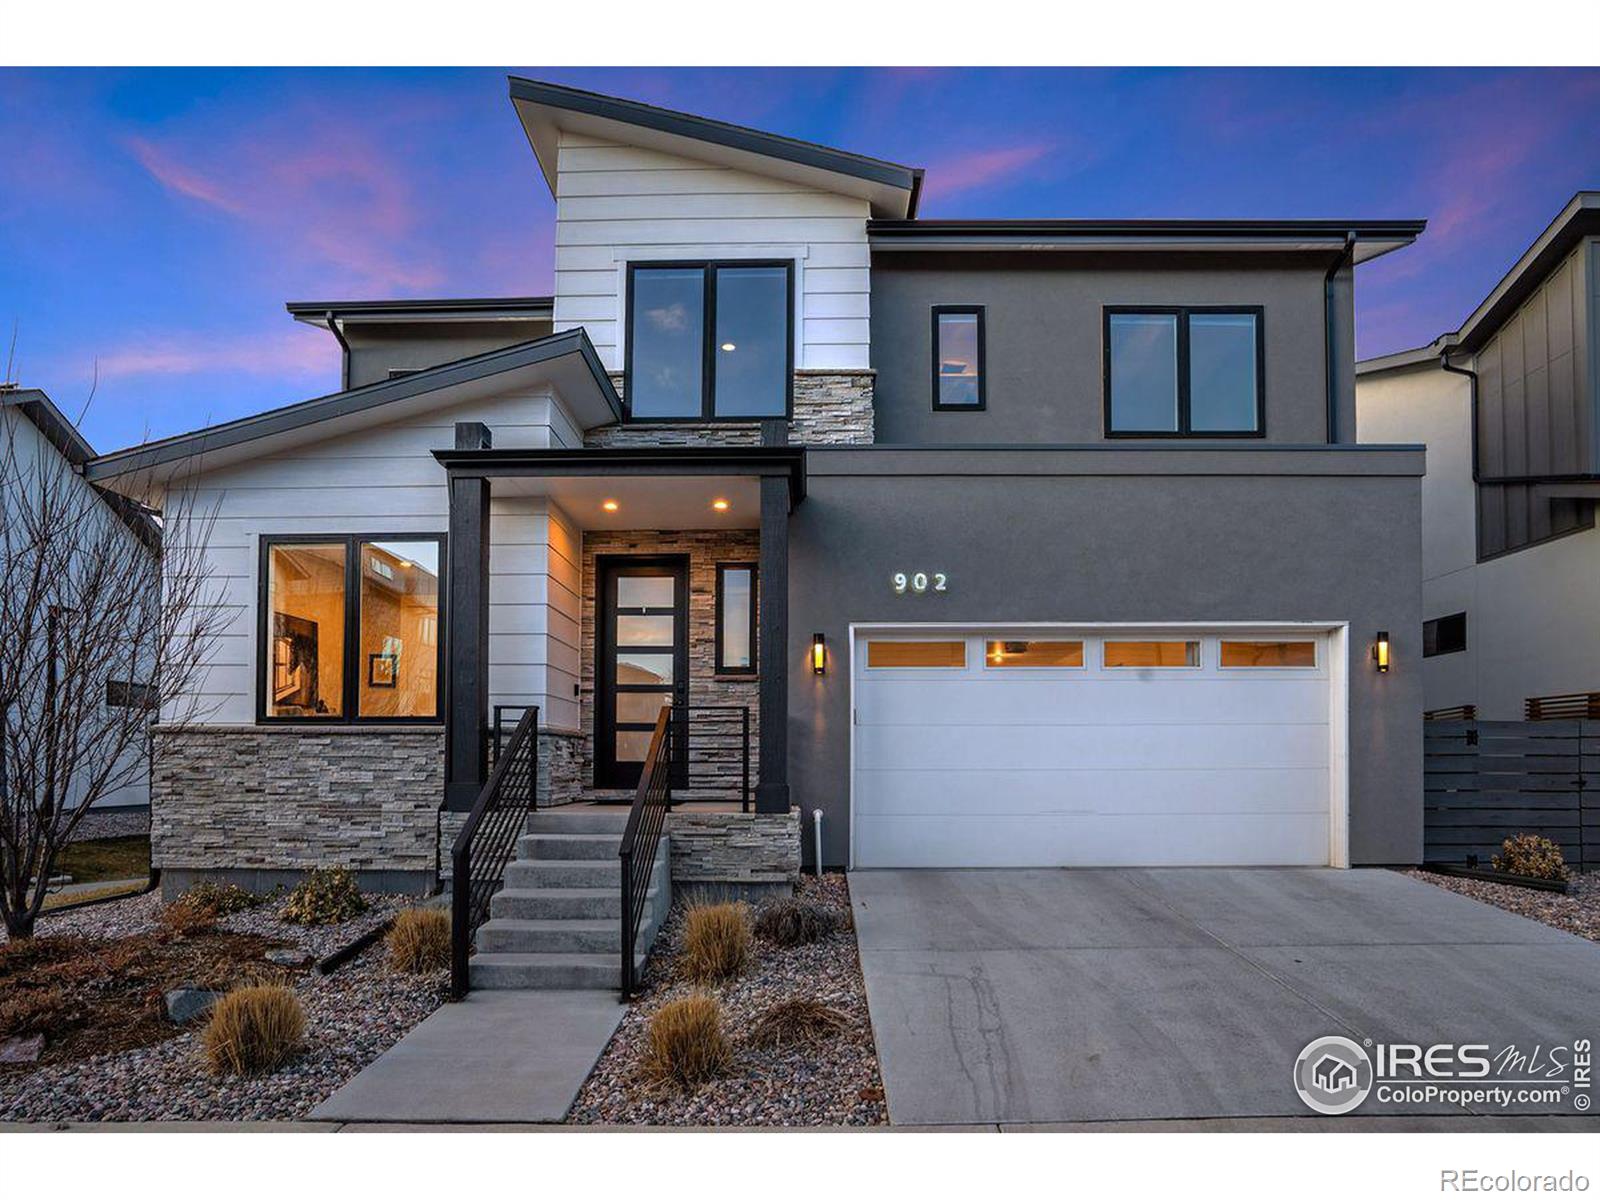 902  Water Course Way, fort collins MLS: 4567891004561 Beds: 4 Baths: 4 Price: $1,325,000